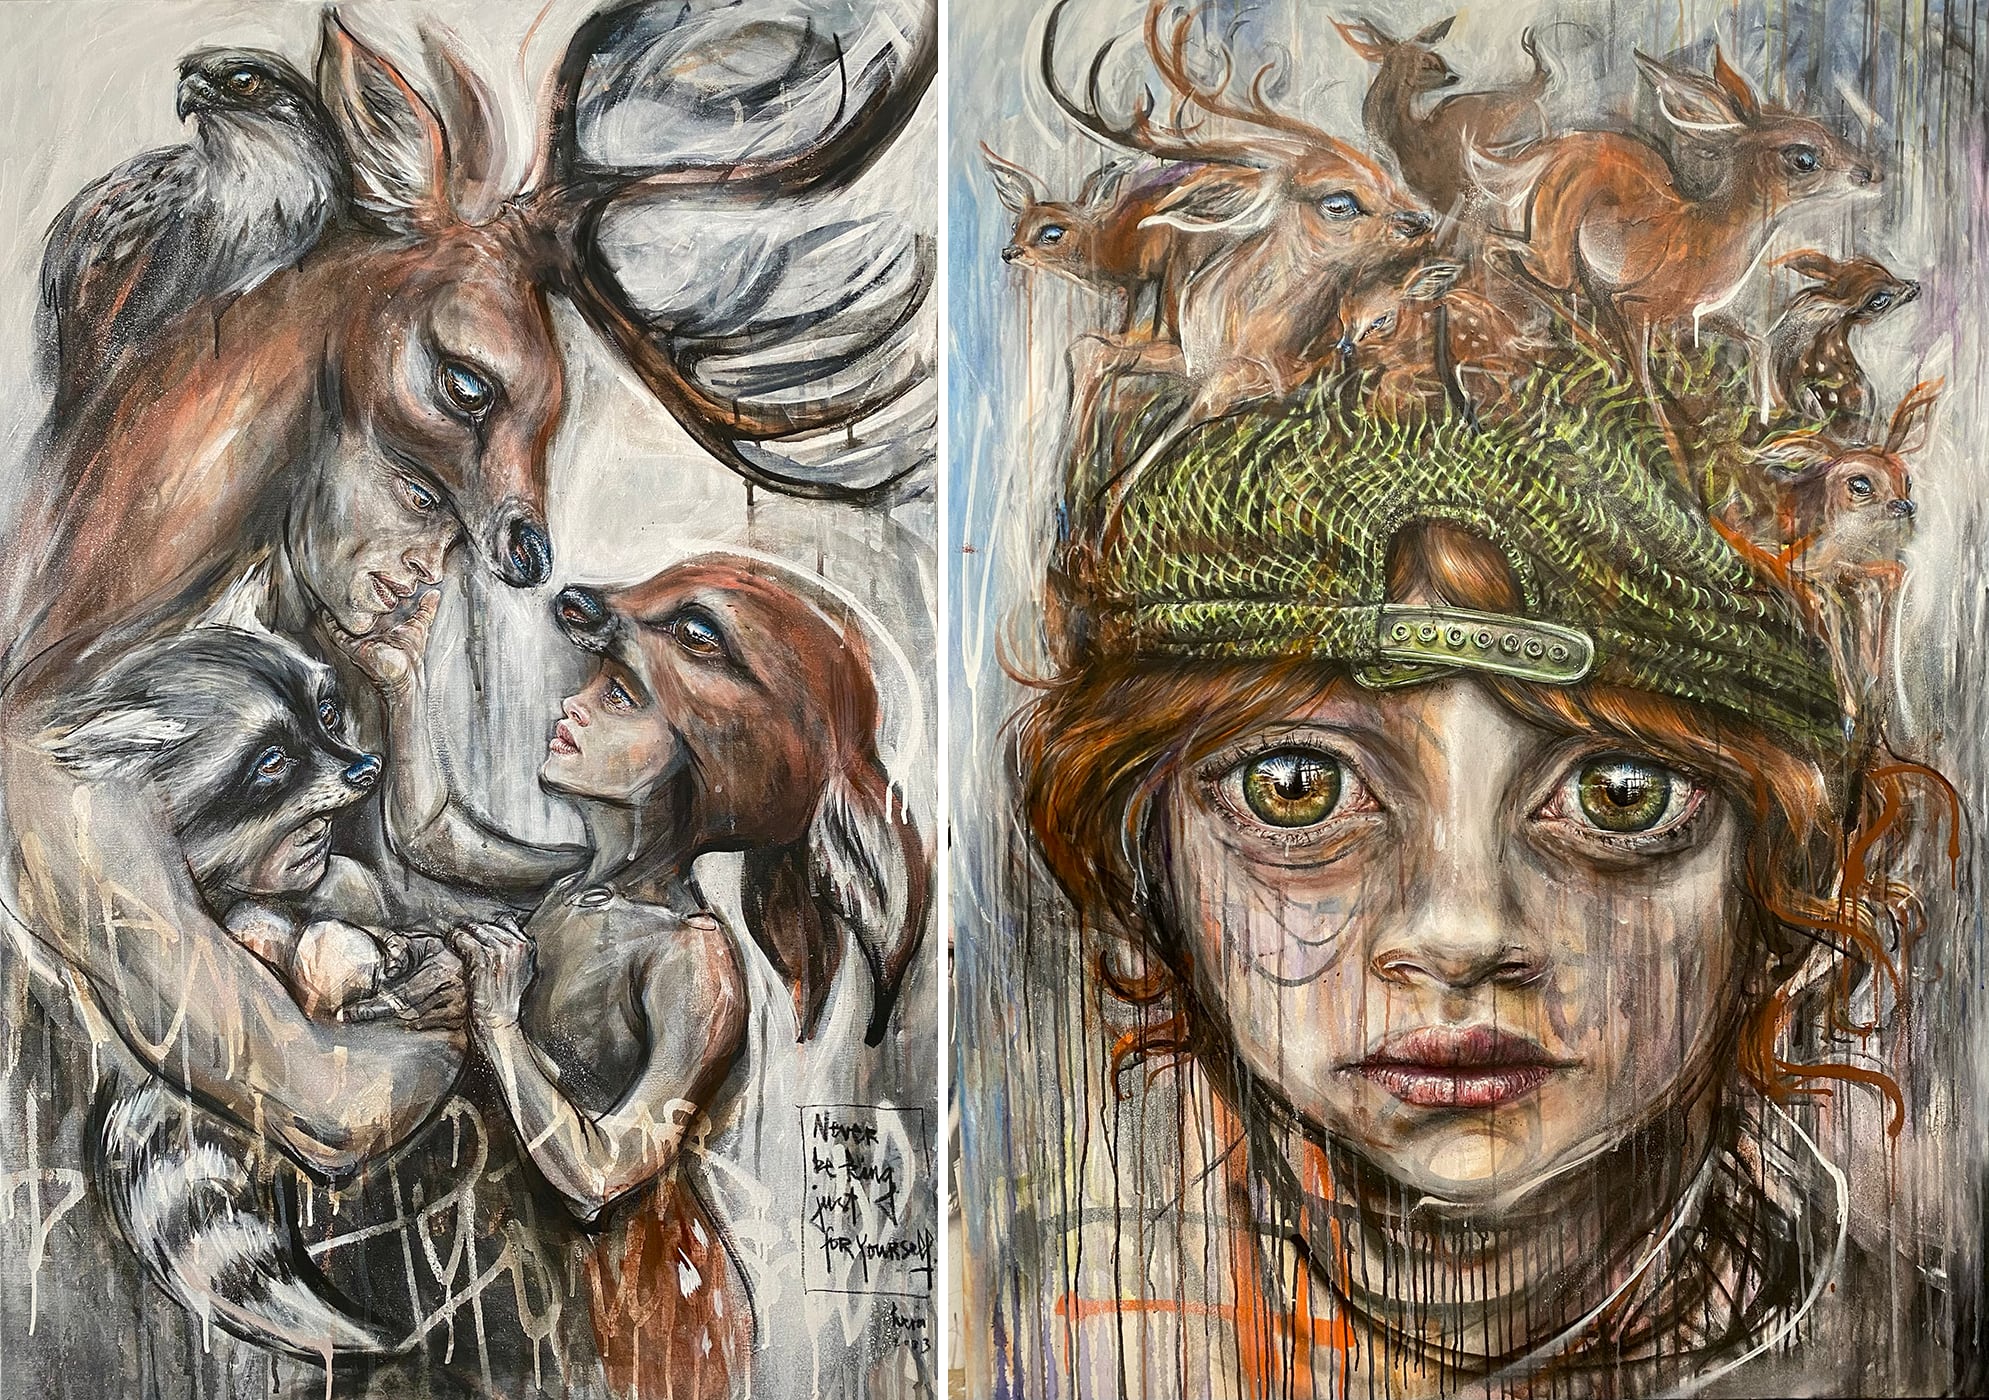 Two images, on the left a painting of a woman wearing a deer headdress facing a man with a similar buck garment, who is cradling a raccoon baby. On the right is a woman facing the viewer wearing a green hat with several tiny deer on her head